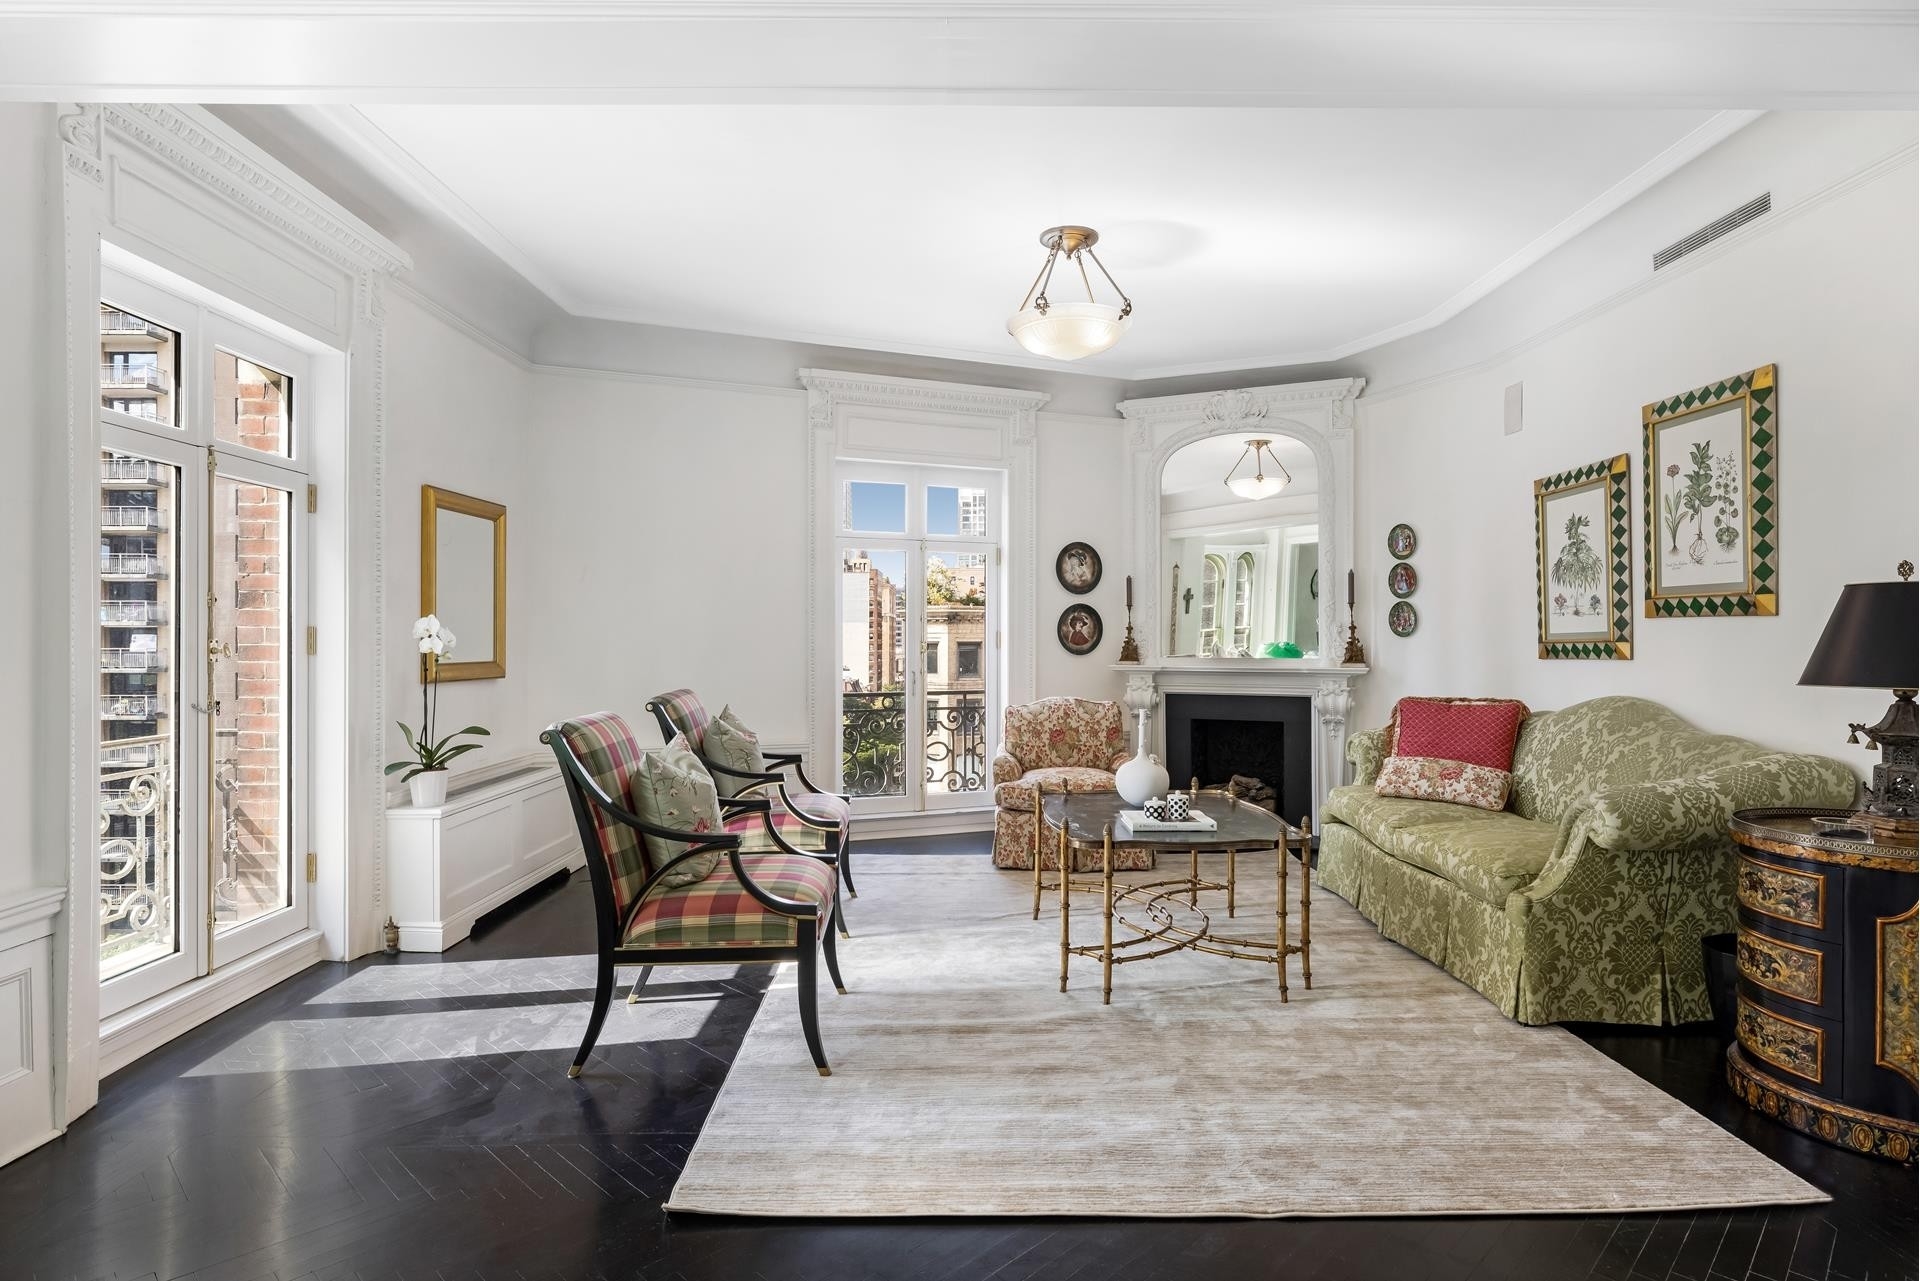 Co-op Properties for Sale at The Dorilton, 171 W 71ST ST, 87 Lincoln Square, New York, New York 10023